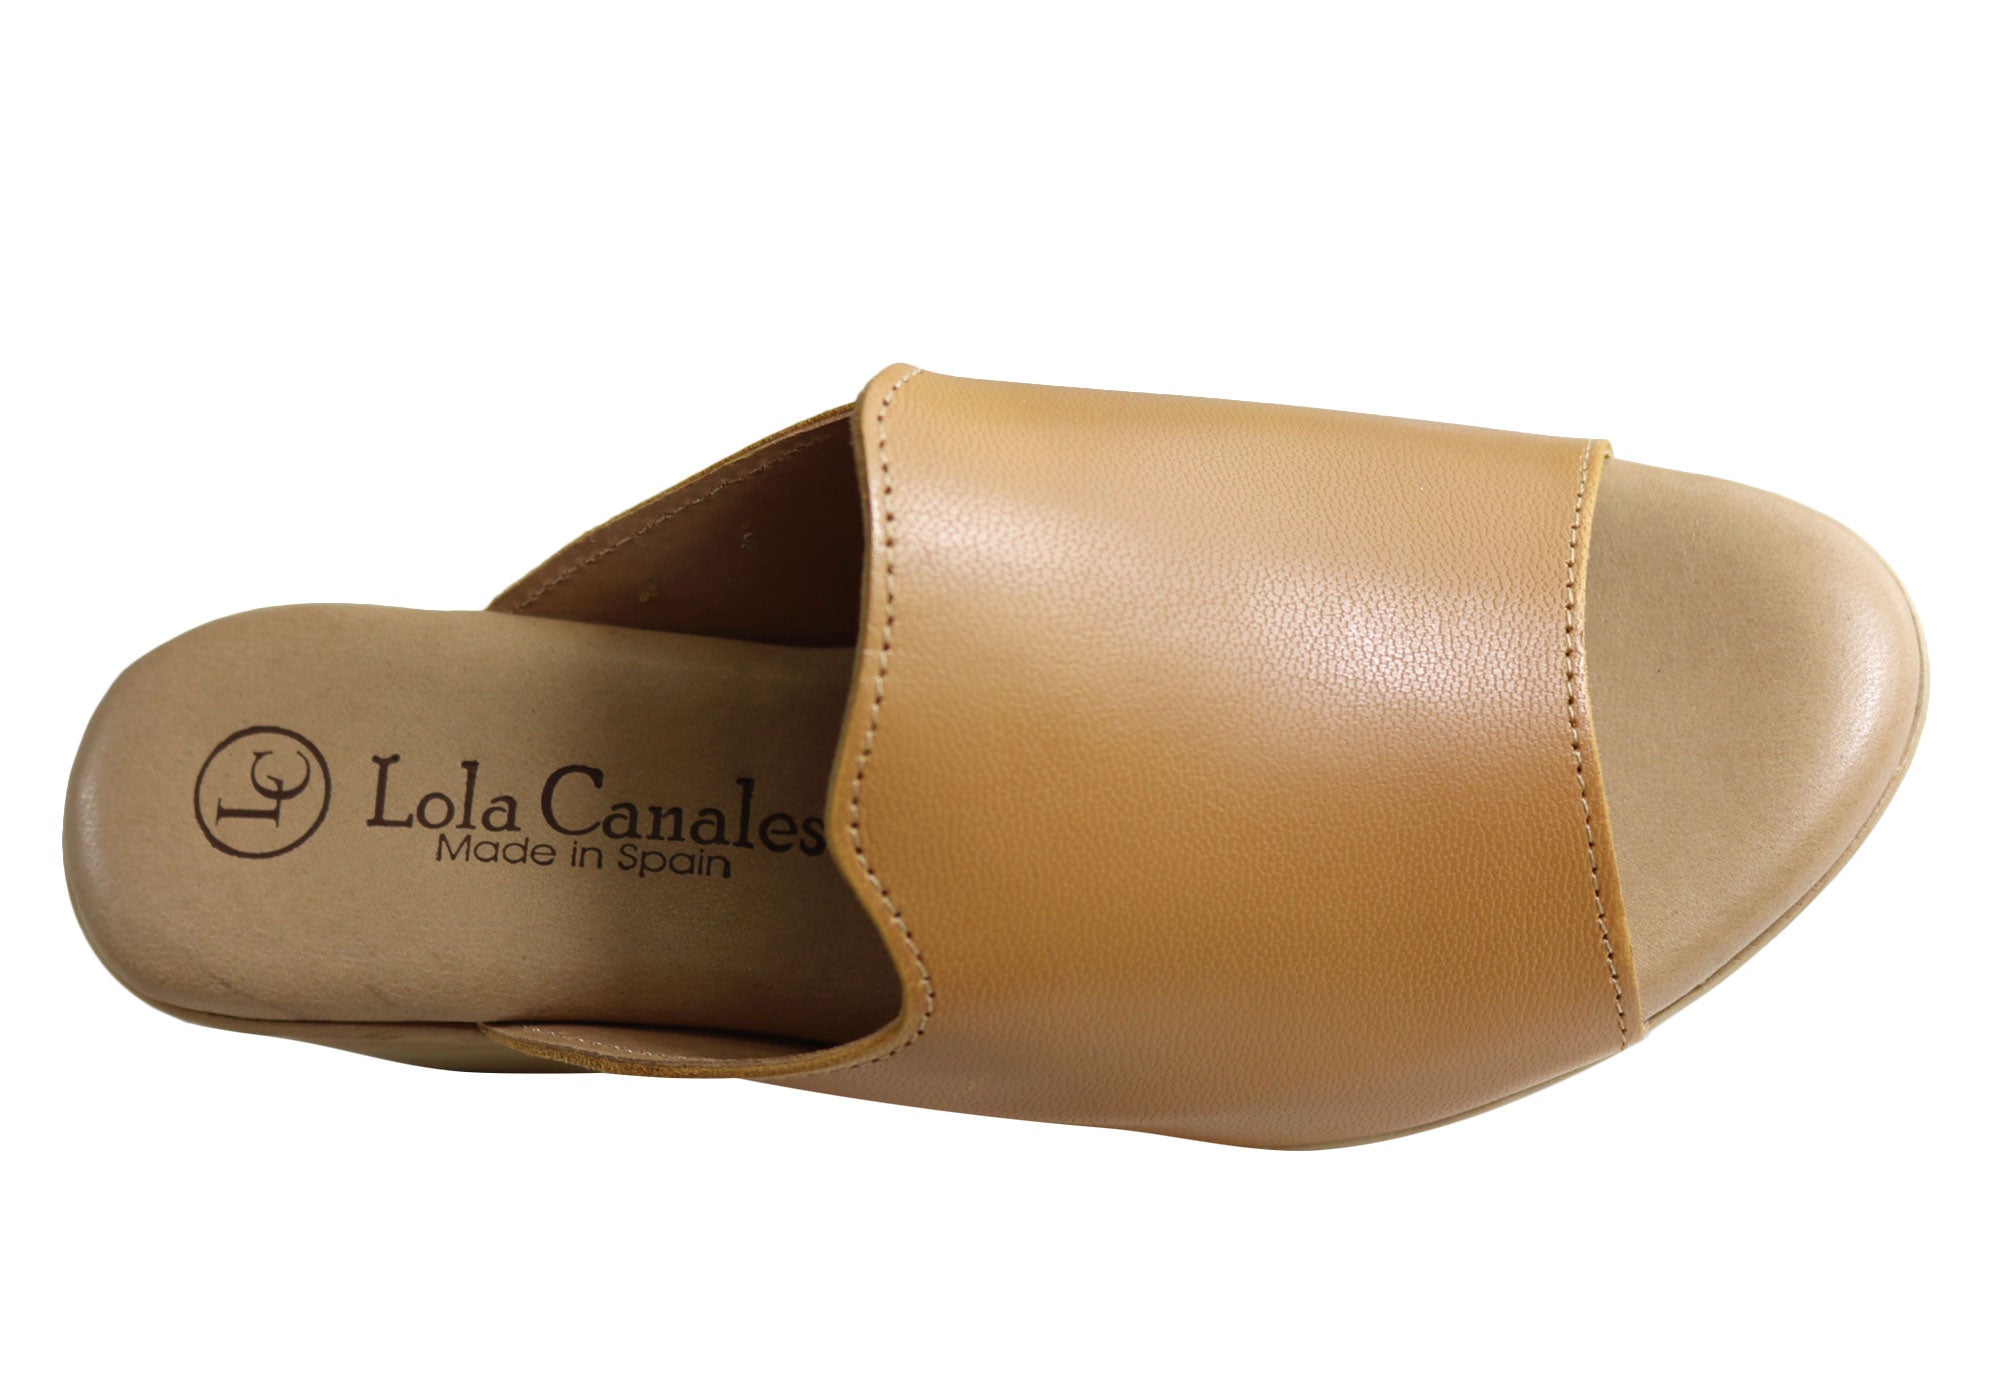 Lola Canales Trinity Womens Spanish Comfortable Leather Slide Sandals